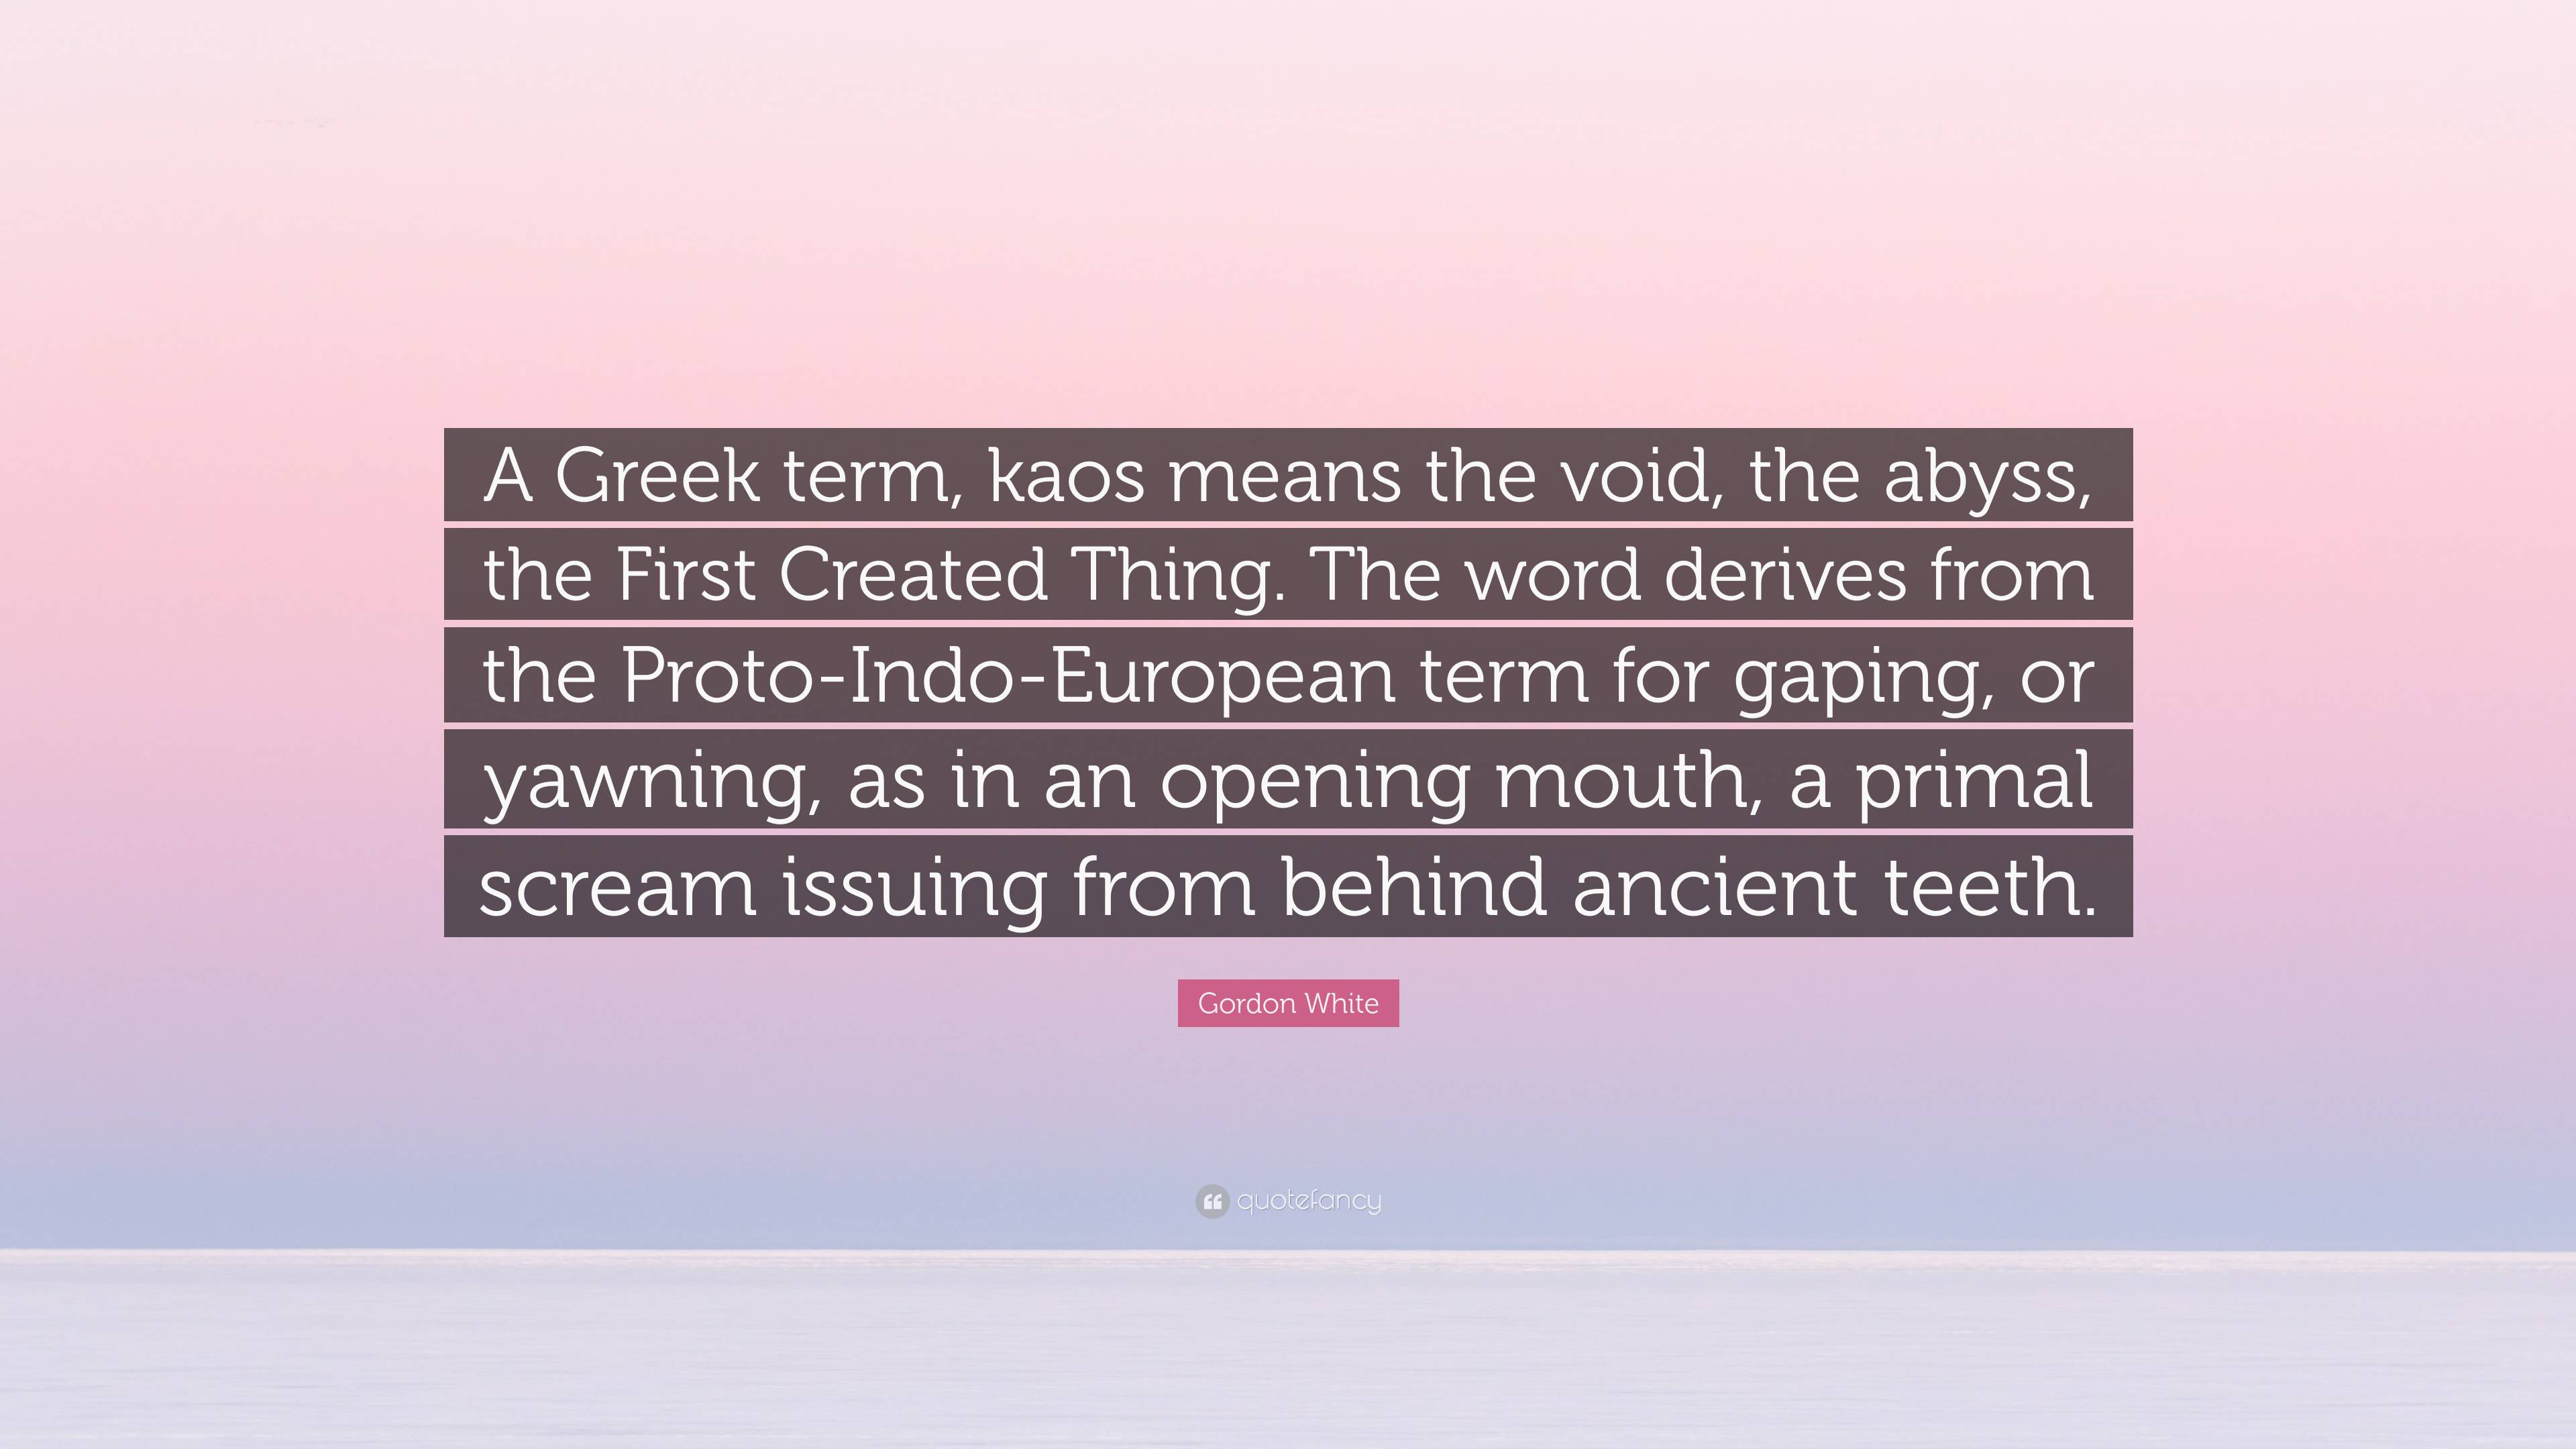 Gordon White Quote: “A Greek term, kaos means the void, the abyss